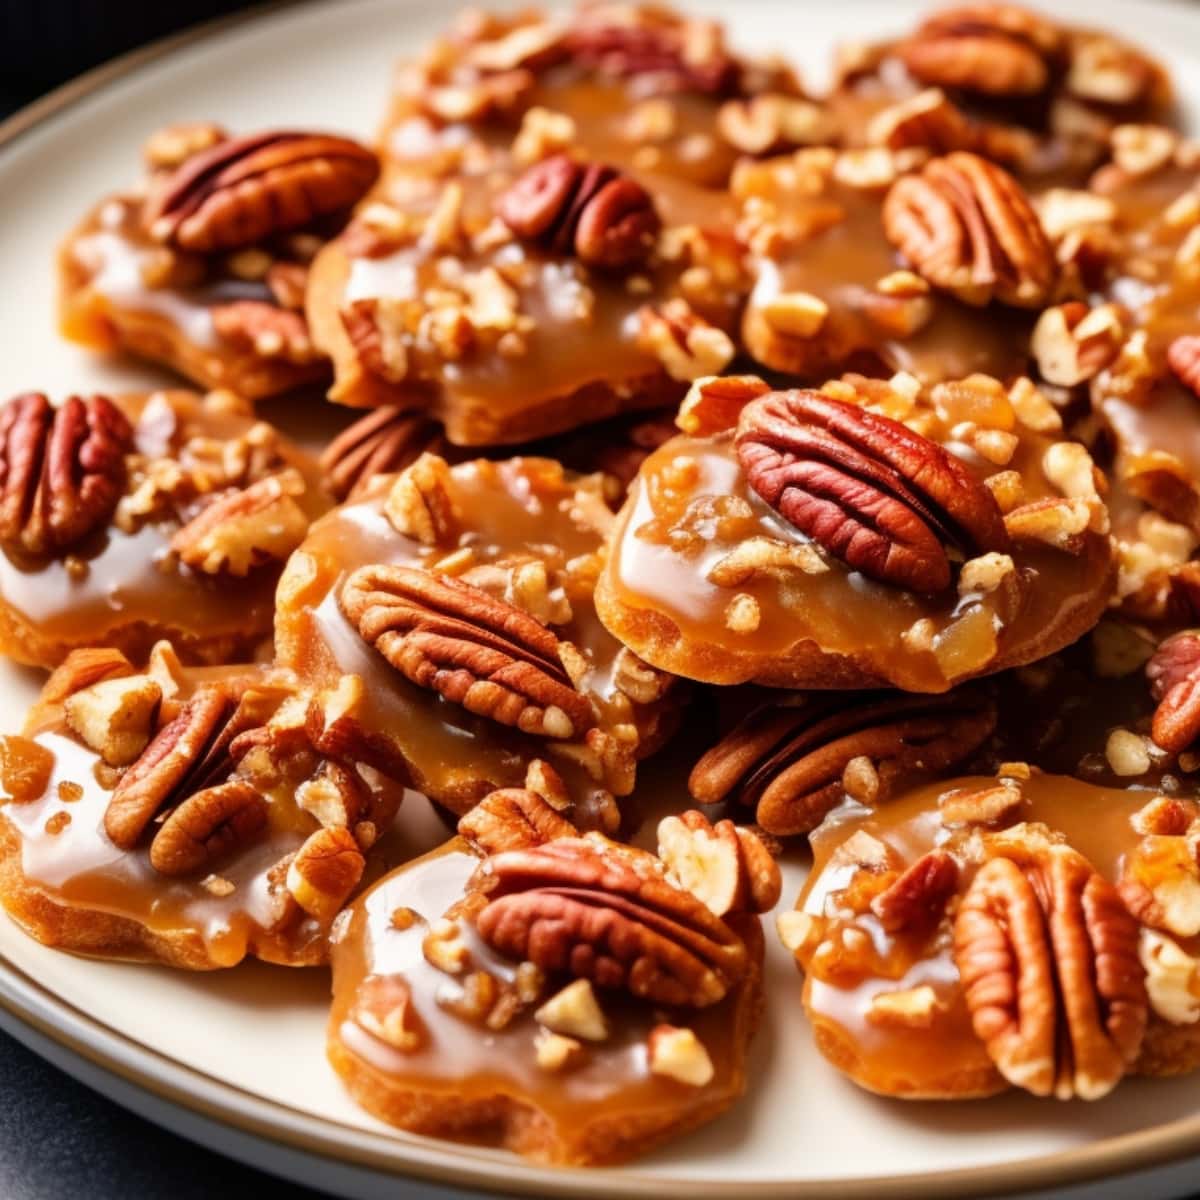 A plate of pecan pralines with caramel sauce, a delightful treat for any occasion